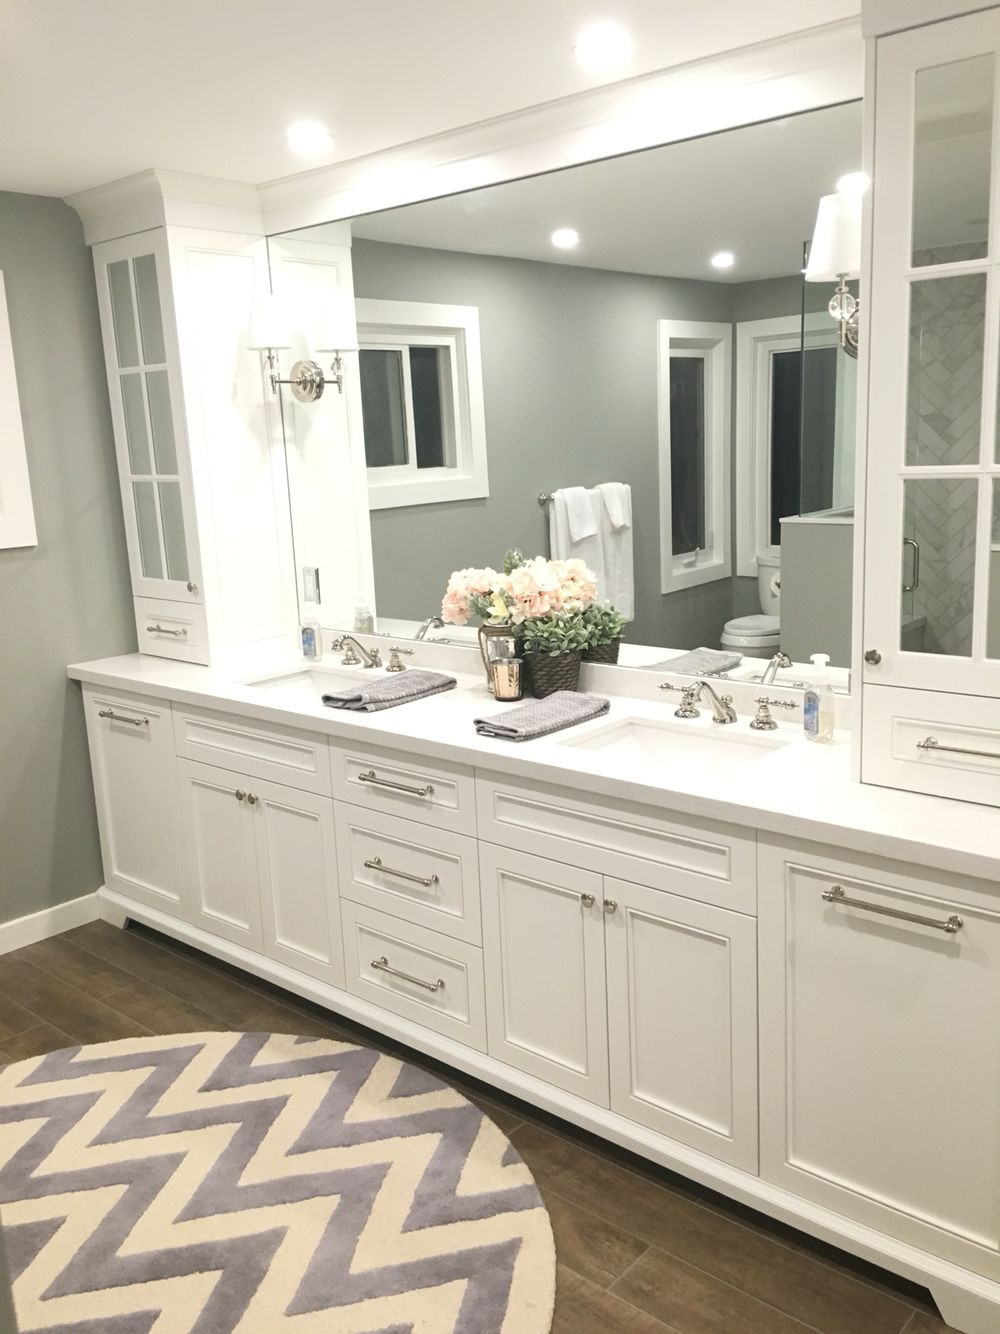 Bathroom Vanity Design Ideas
 Just Got a Little Space These Small Bathroom Designs Will